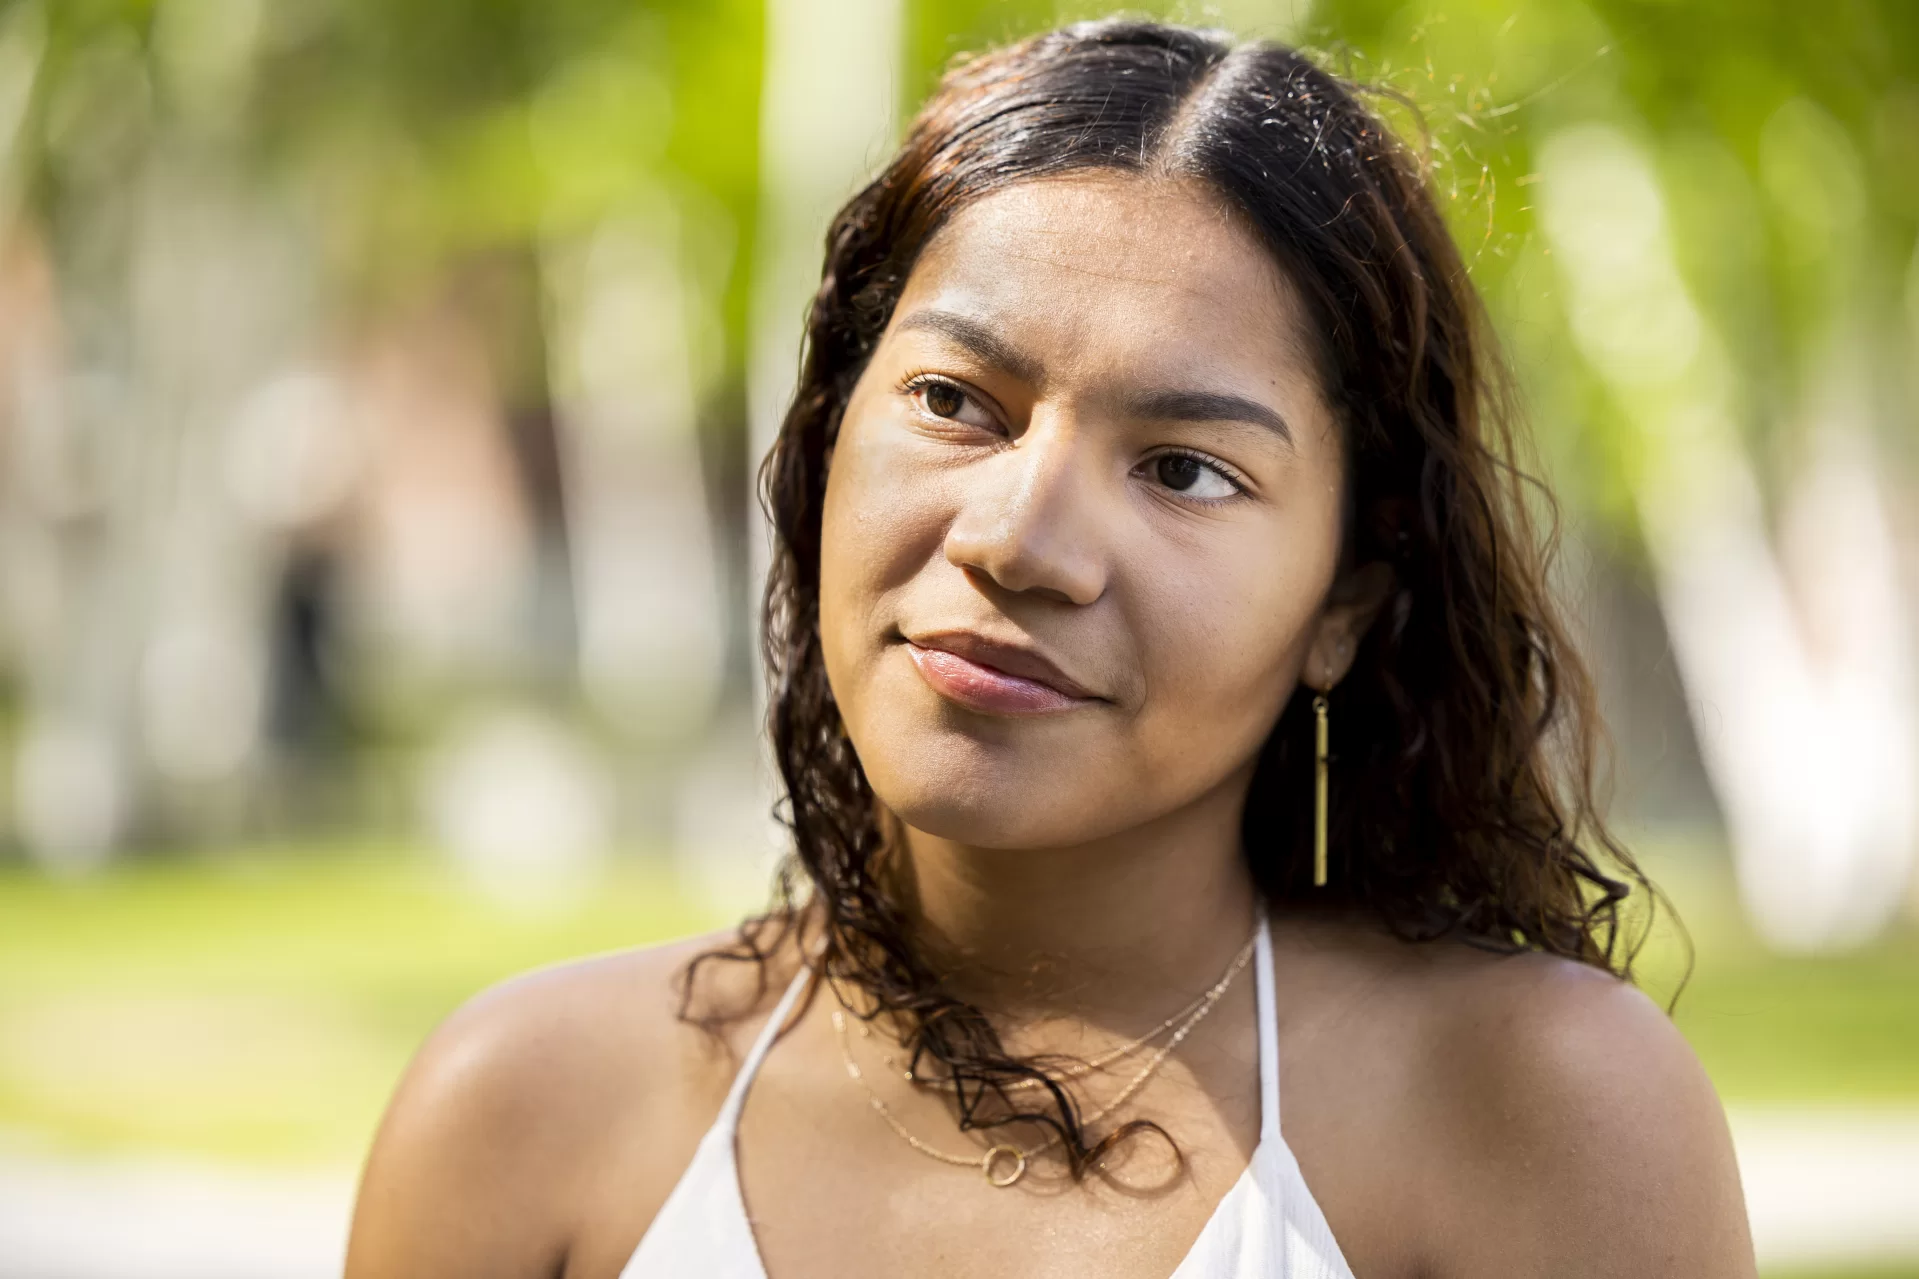 Teresa Chico ’22 of New City, N.Y., a double major in Rhetoric, Film, and Screen Studies and Africana, will be the Senior Speaker at the 2022 Commencement. She poses on Alumni Walk and the Historic Quad. Also shown with Jeremy Bruce ’22 of Portland, Maine.